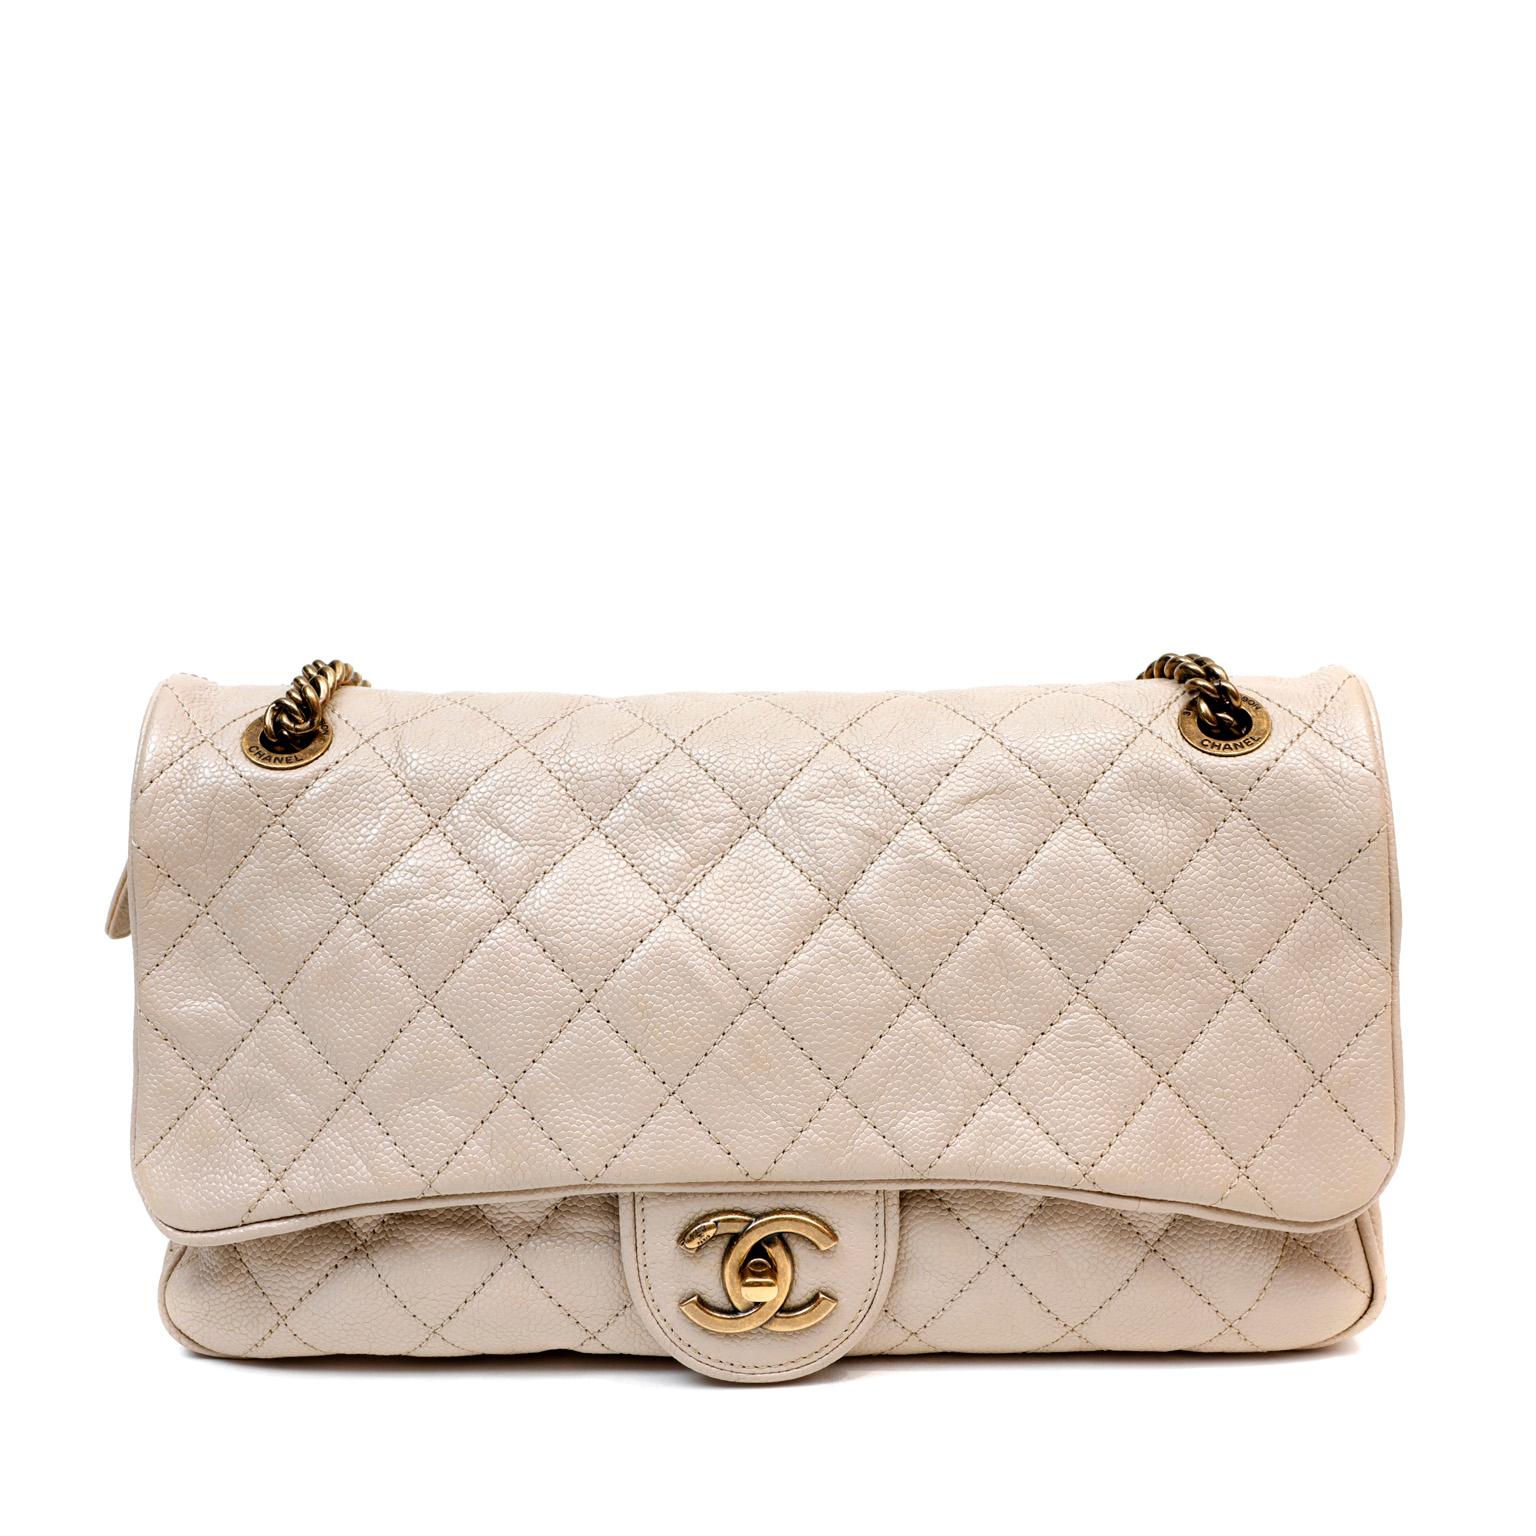 This authentic Chanel Beige Distressed Caviar Flap Bag is in good previously owned condition.  A somewhat more relaxed silhouette than the Classic Flap, this crumpled caviar version is perfect for nearly any occasion. Neutral beige caviar leather is